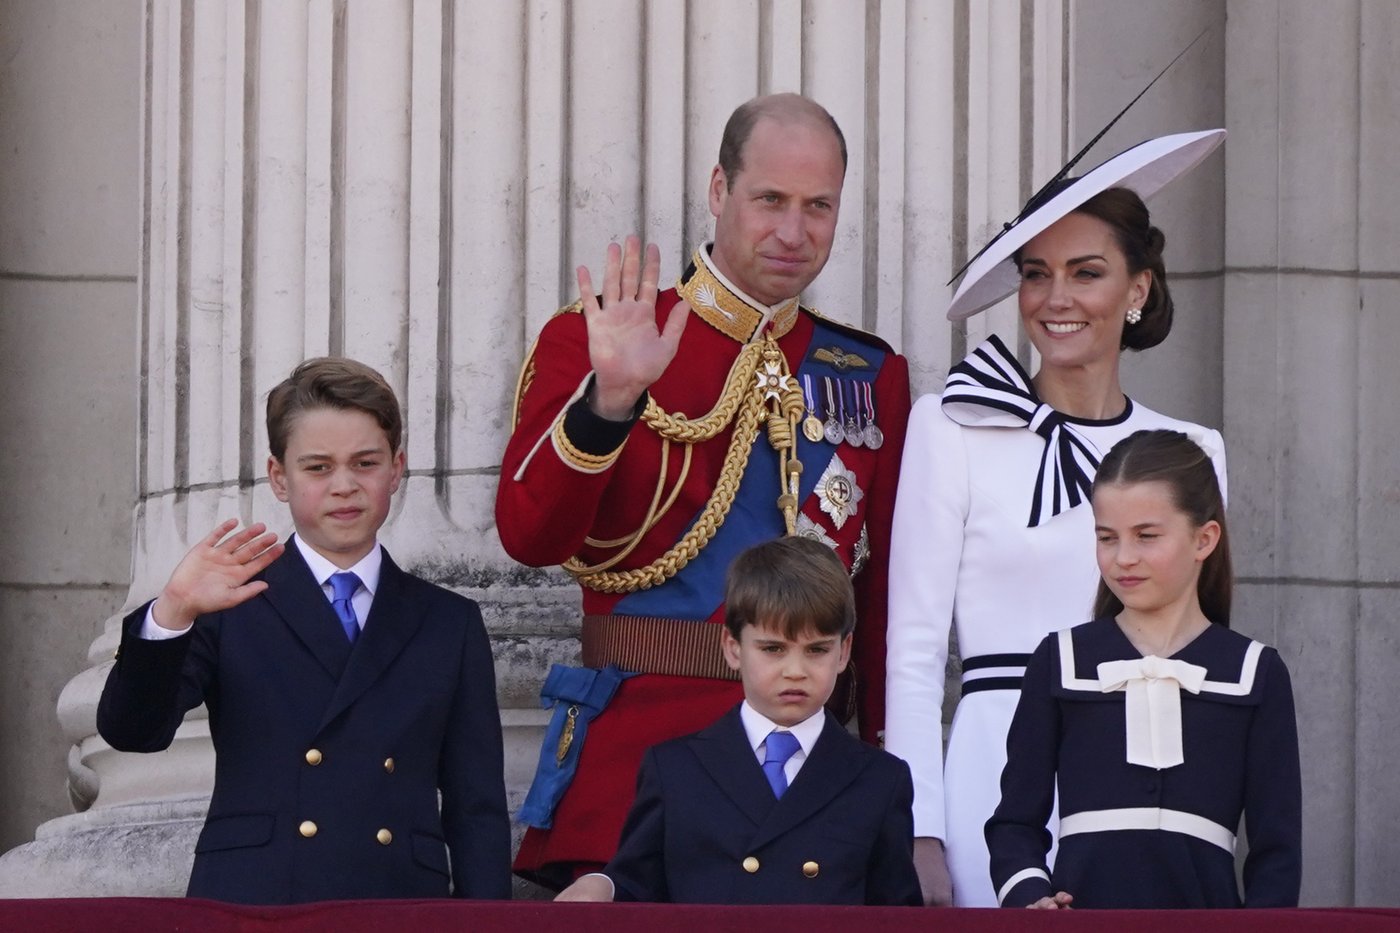 UK royals unite on palace balcony, with Kate back at her first public